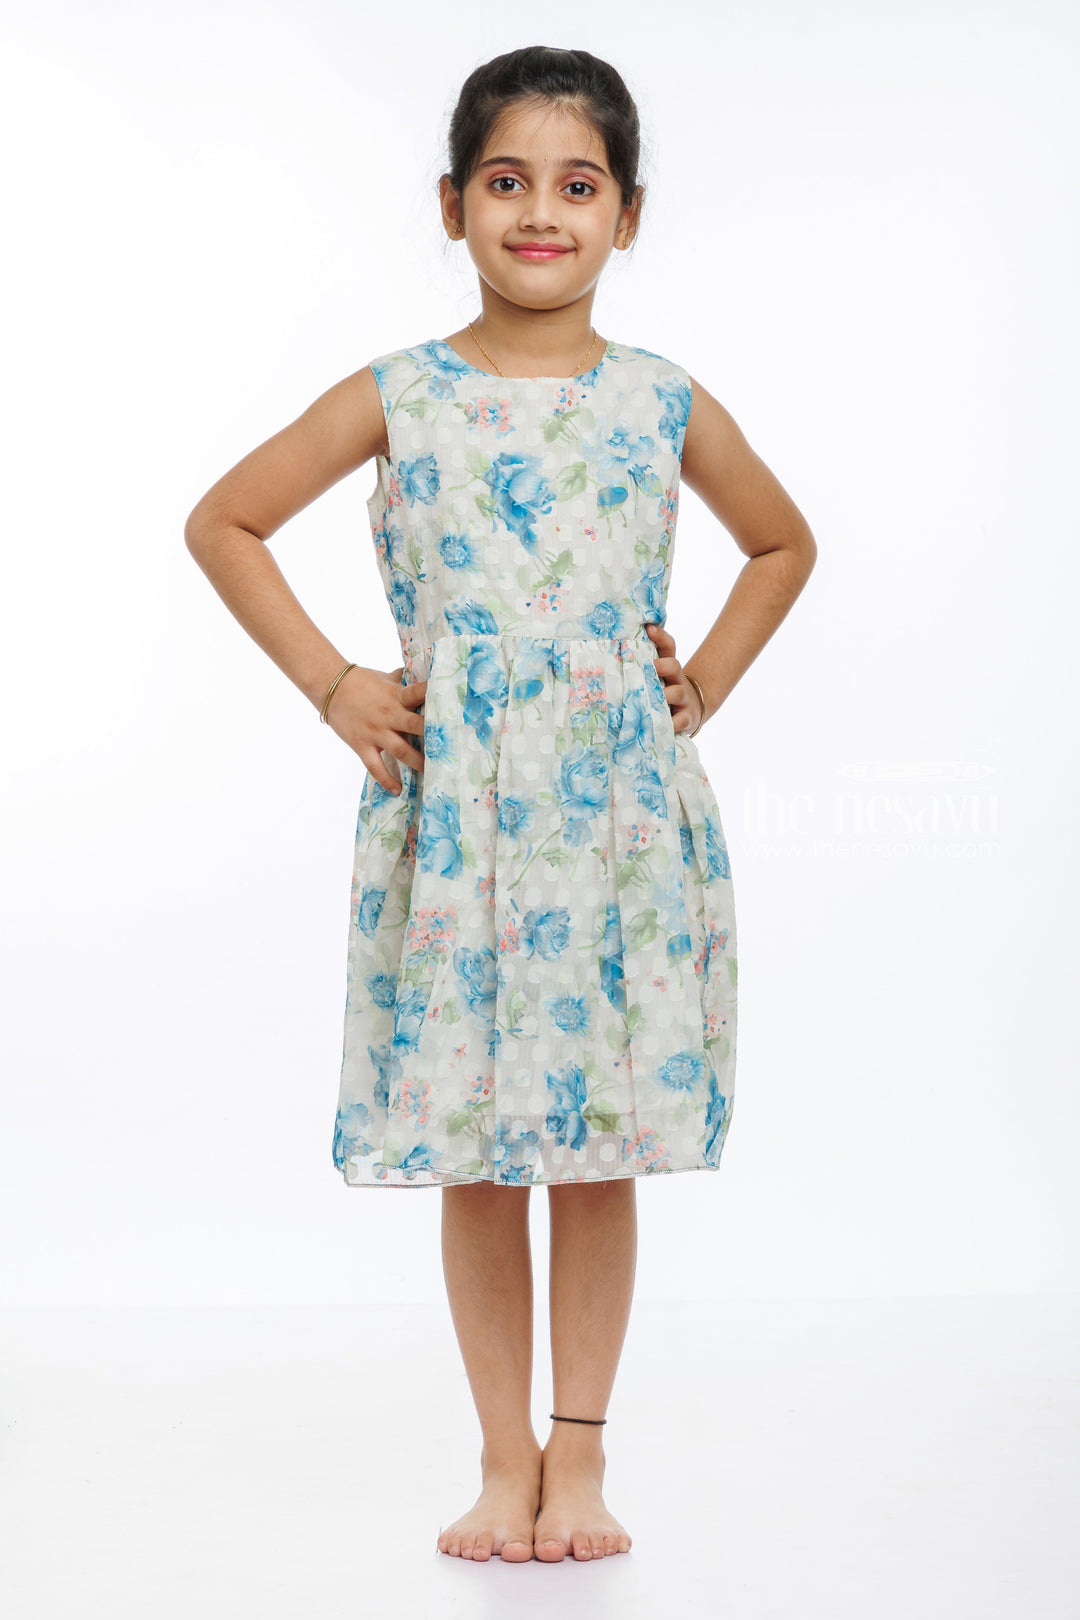 The Nesavu Girls Fancy Frock Chic Blue Floral Cotton Dress with Stylish Jacket for Girls Nesavu Girls Summer Cotton Dress with Jacket | Elegant Floral Maxi  Stylish Bolero | The Nesavu